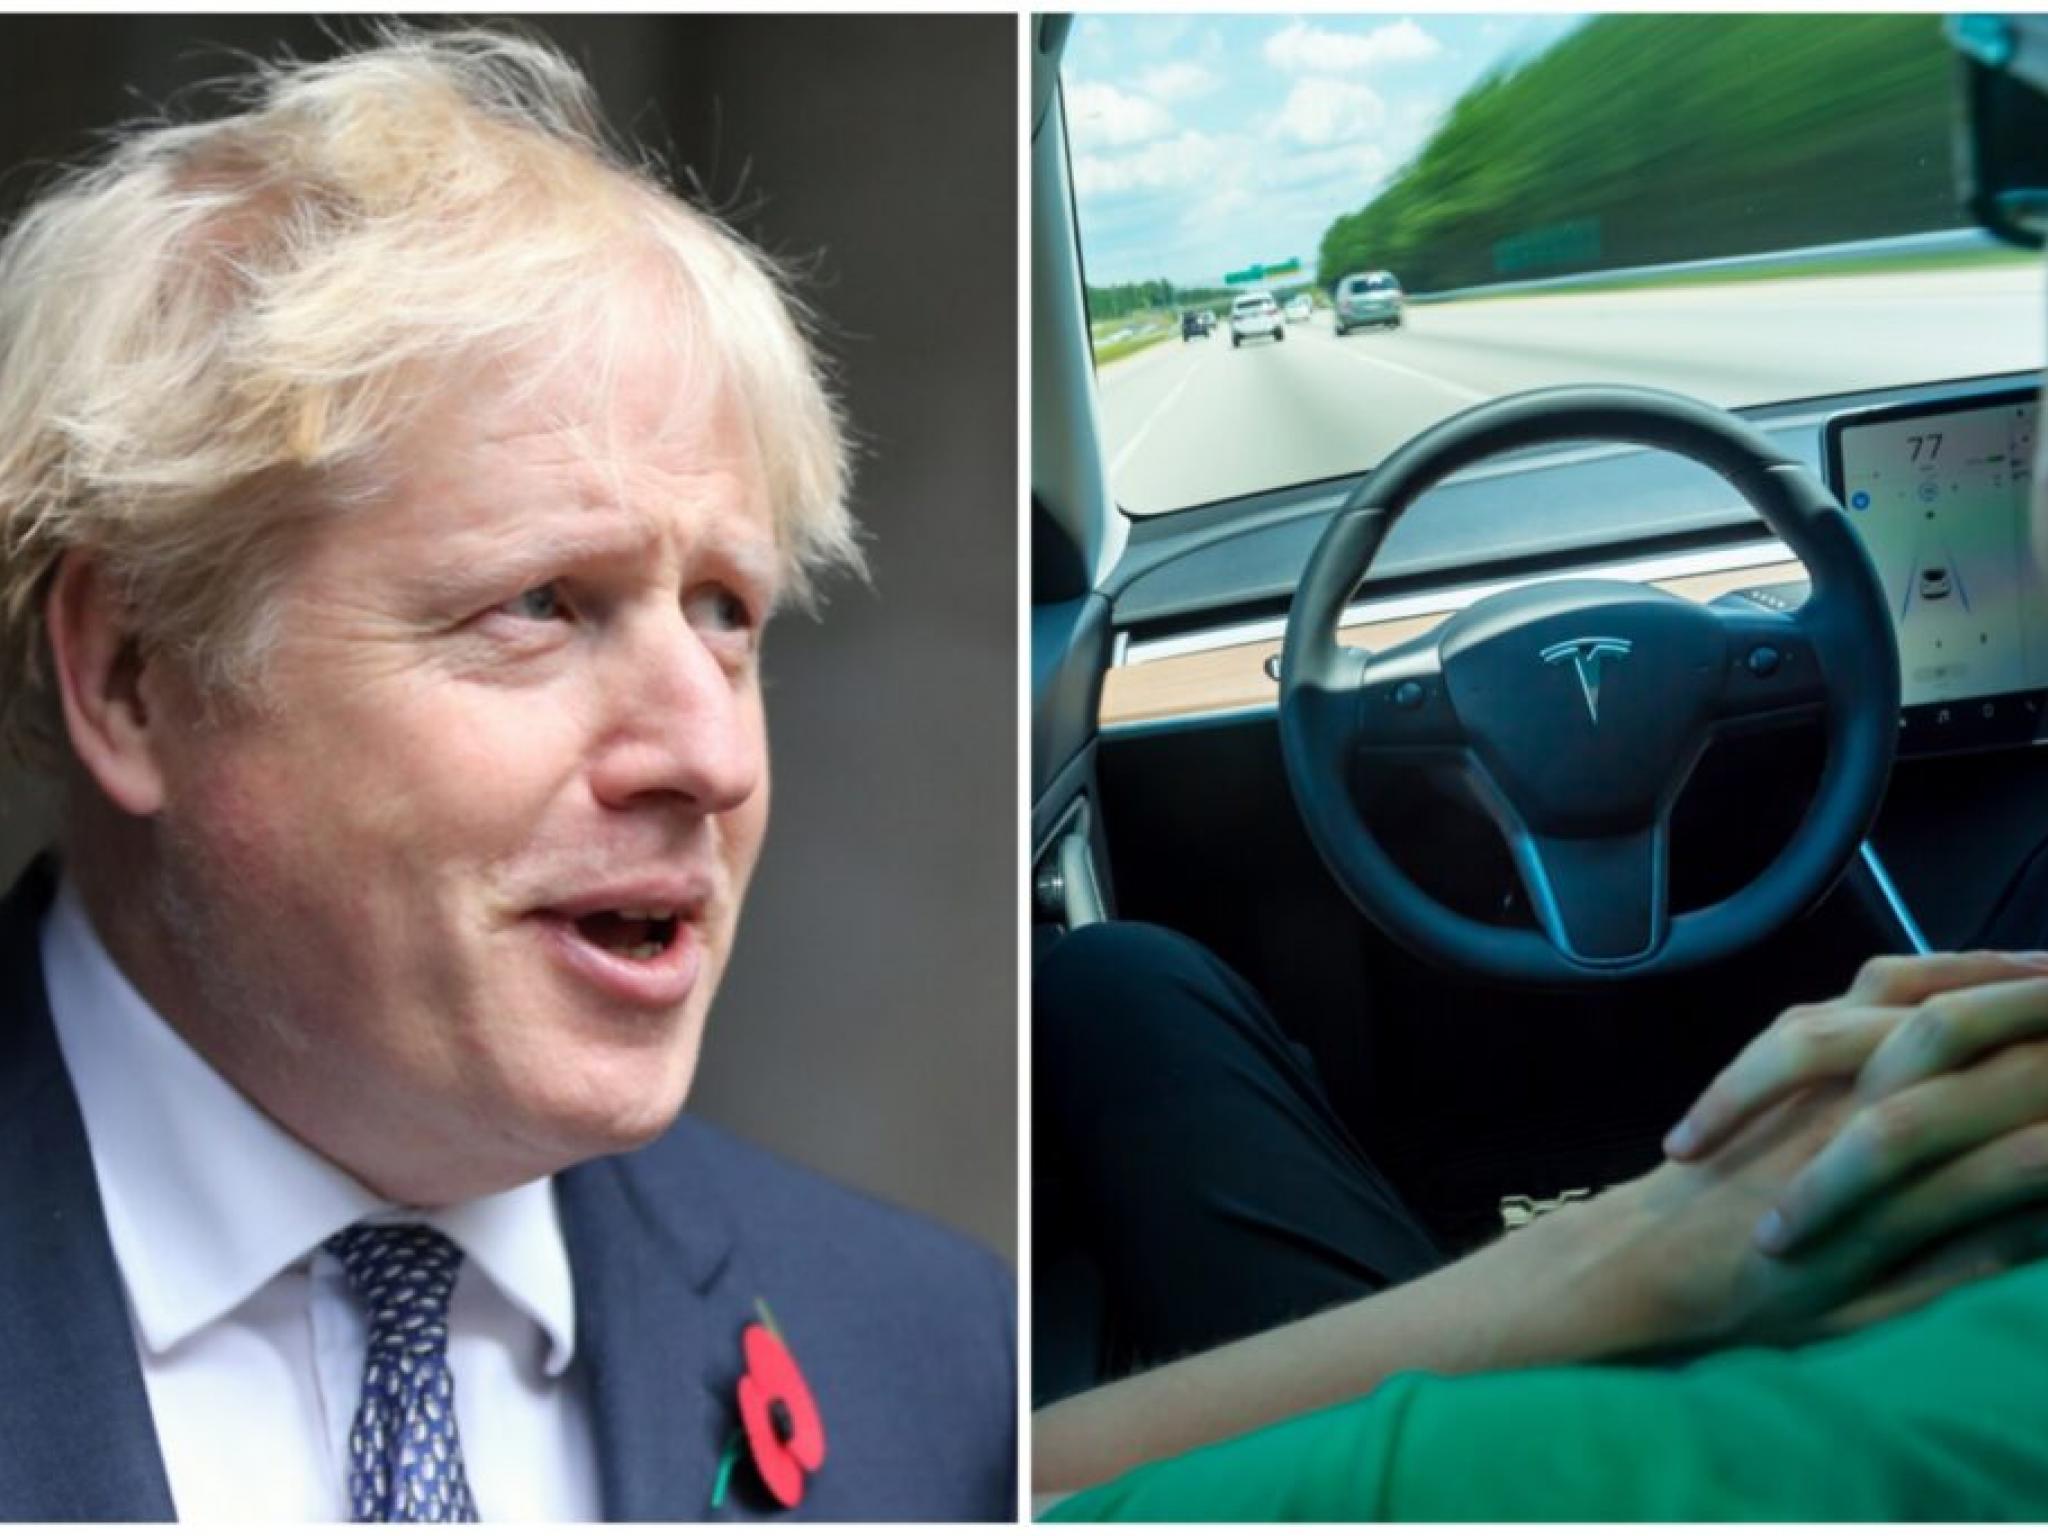  oh-my-word-tesla-fsd-wows-boris-johnson-as-it-drives-his-family-around-hair-raising-la-roads-ex-uk-leader-reveals-new-feature-in-works 